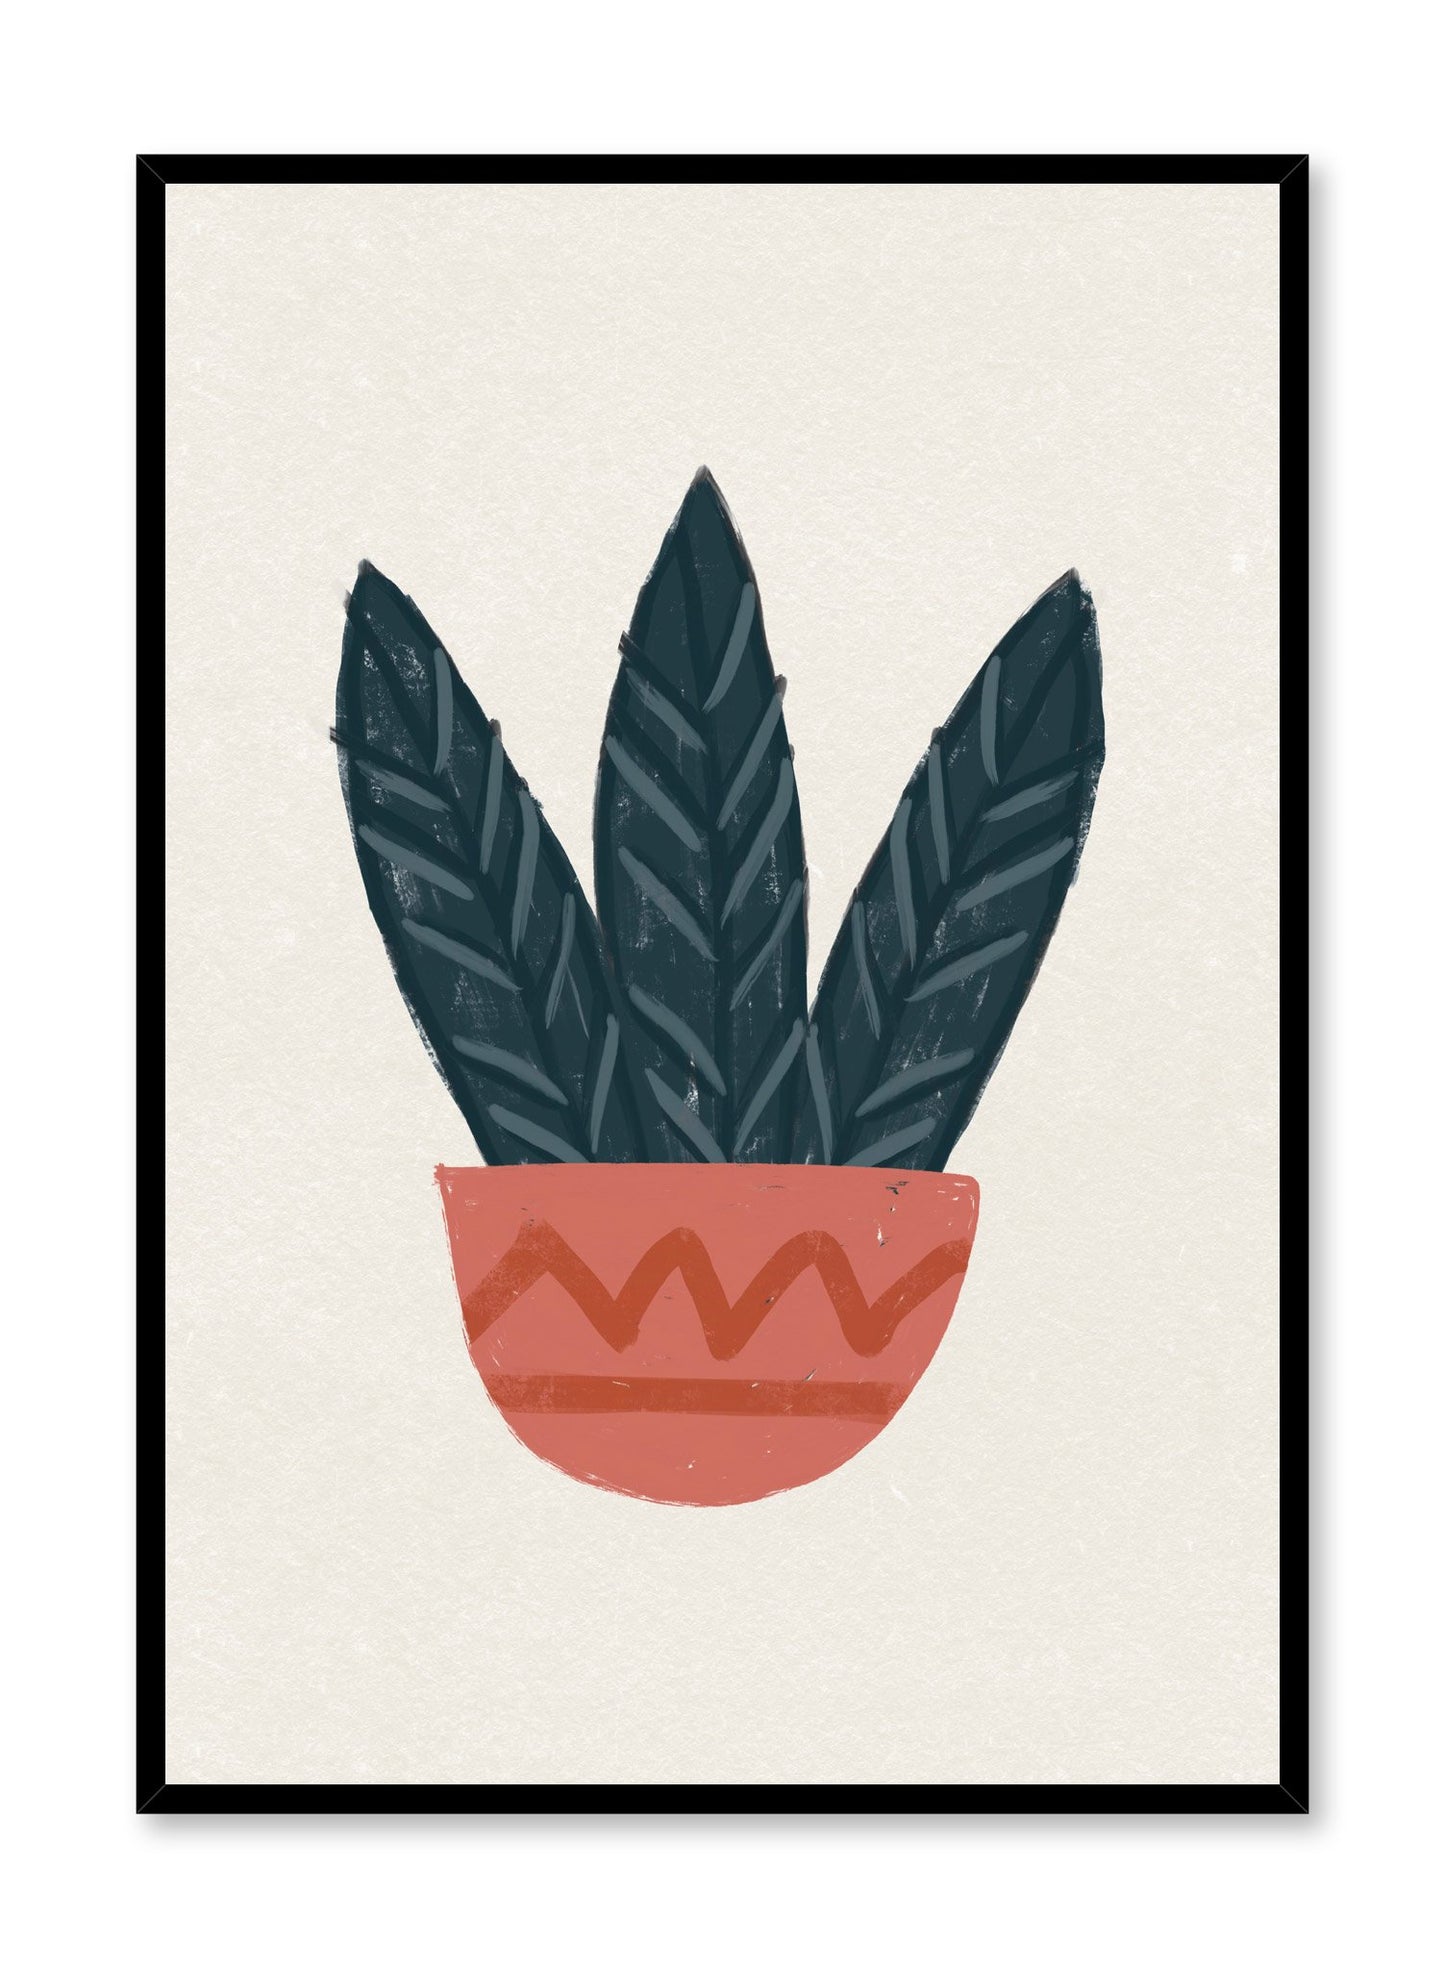 Modern minimalist illustration poster by Opposite Wall with terracotta planter and leaves